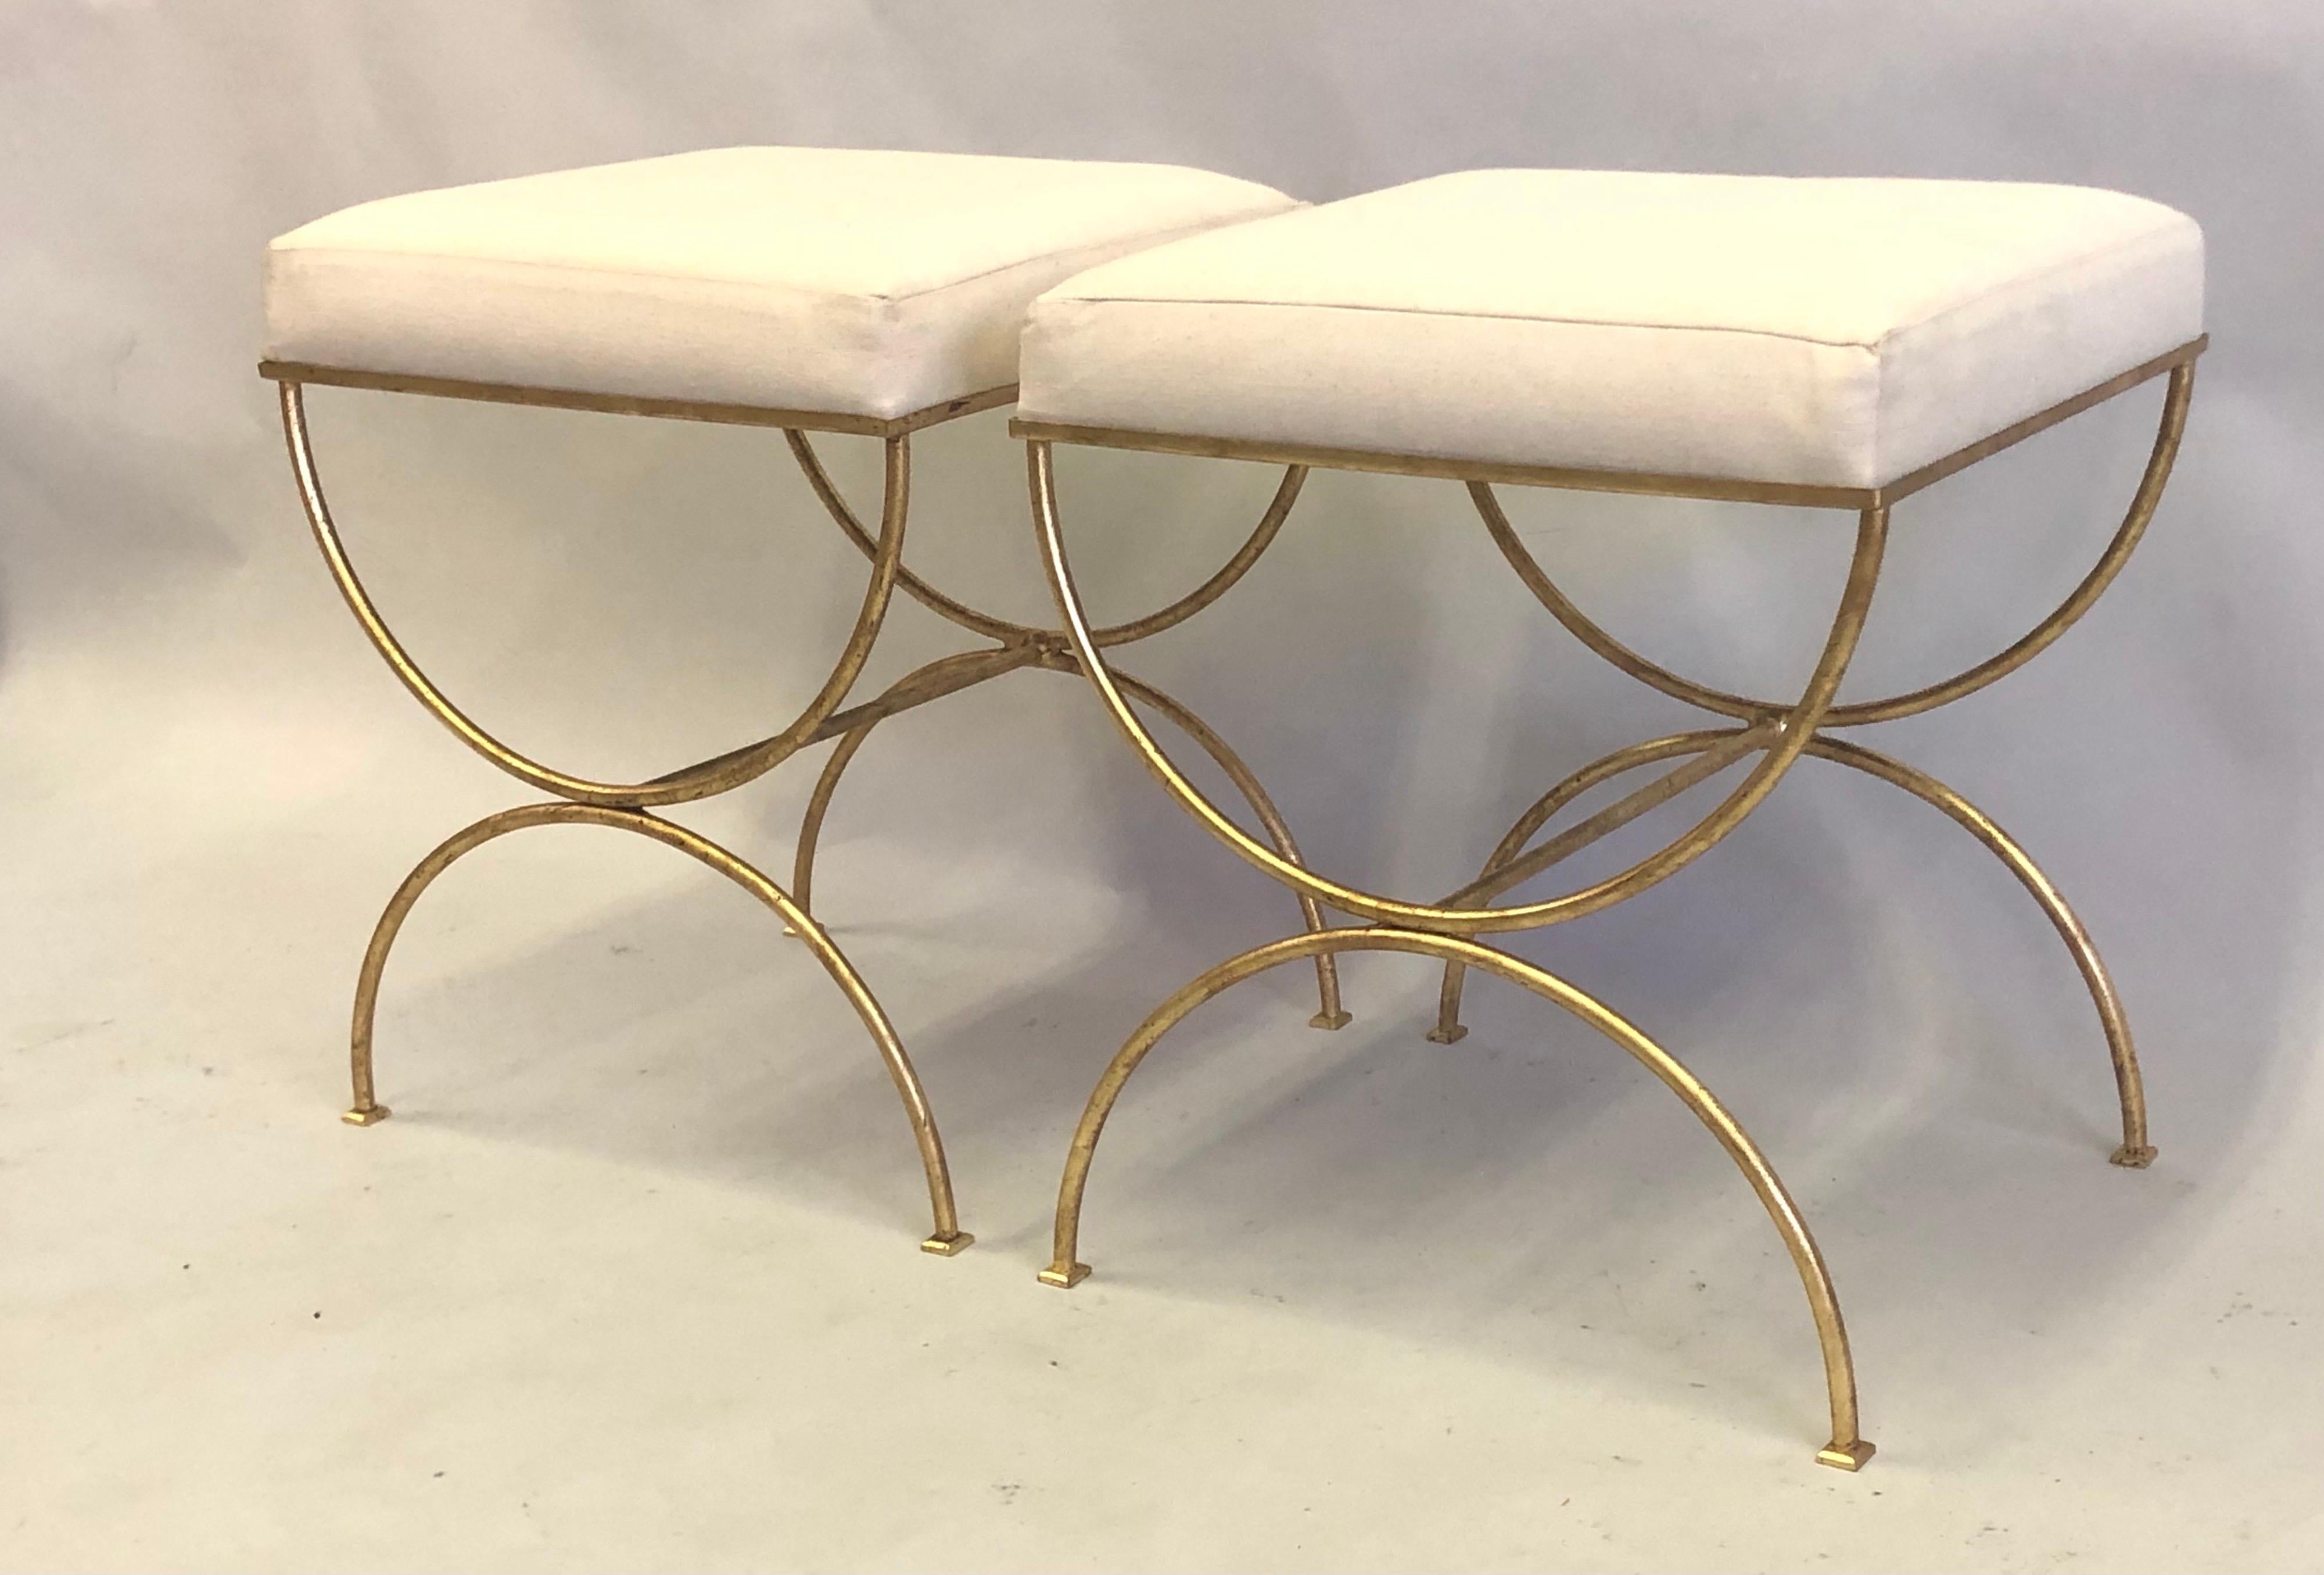 20th Century Pair French Modern Neoclassical Gilt Iron Benches, Style of Jean-Michel Frank For Sale